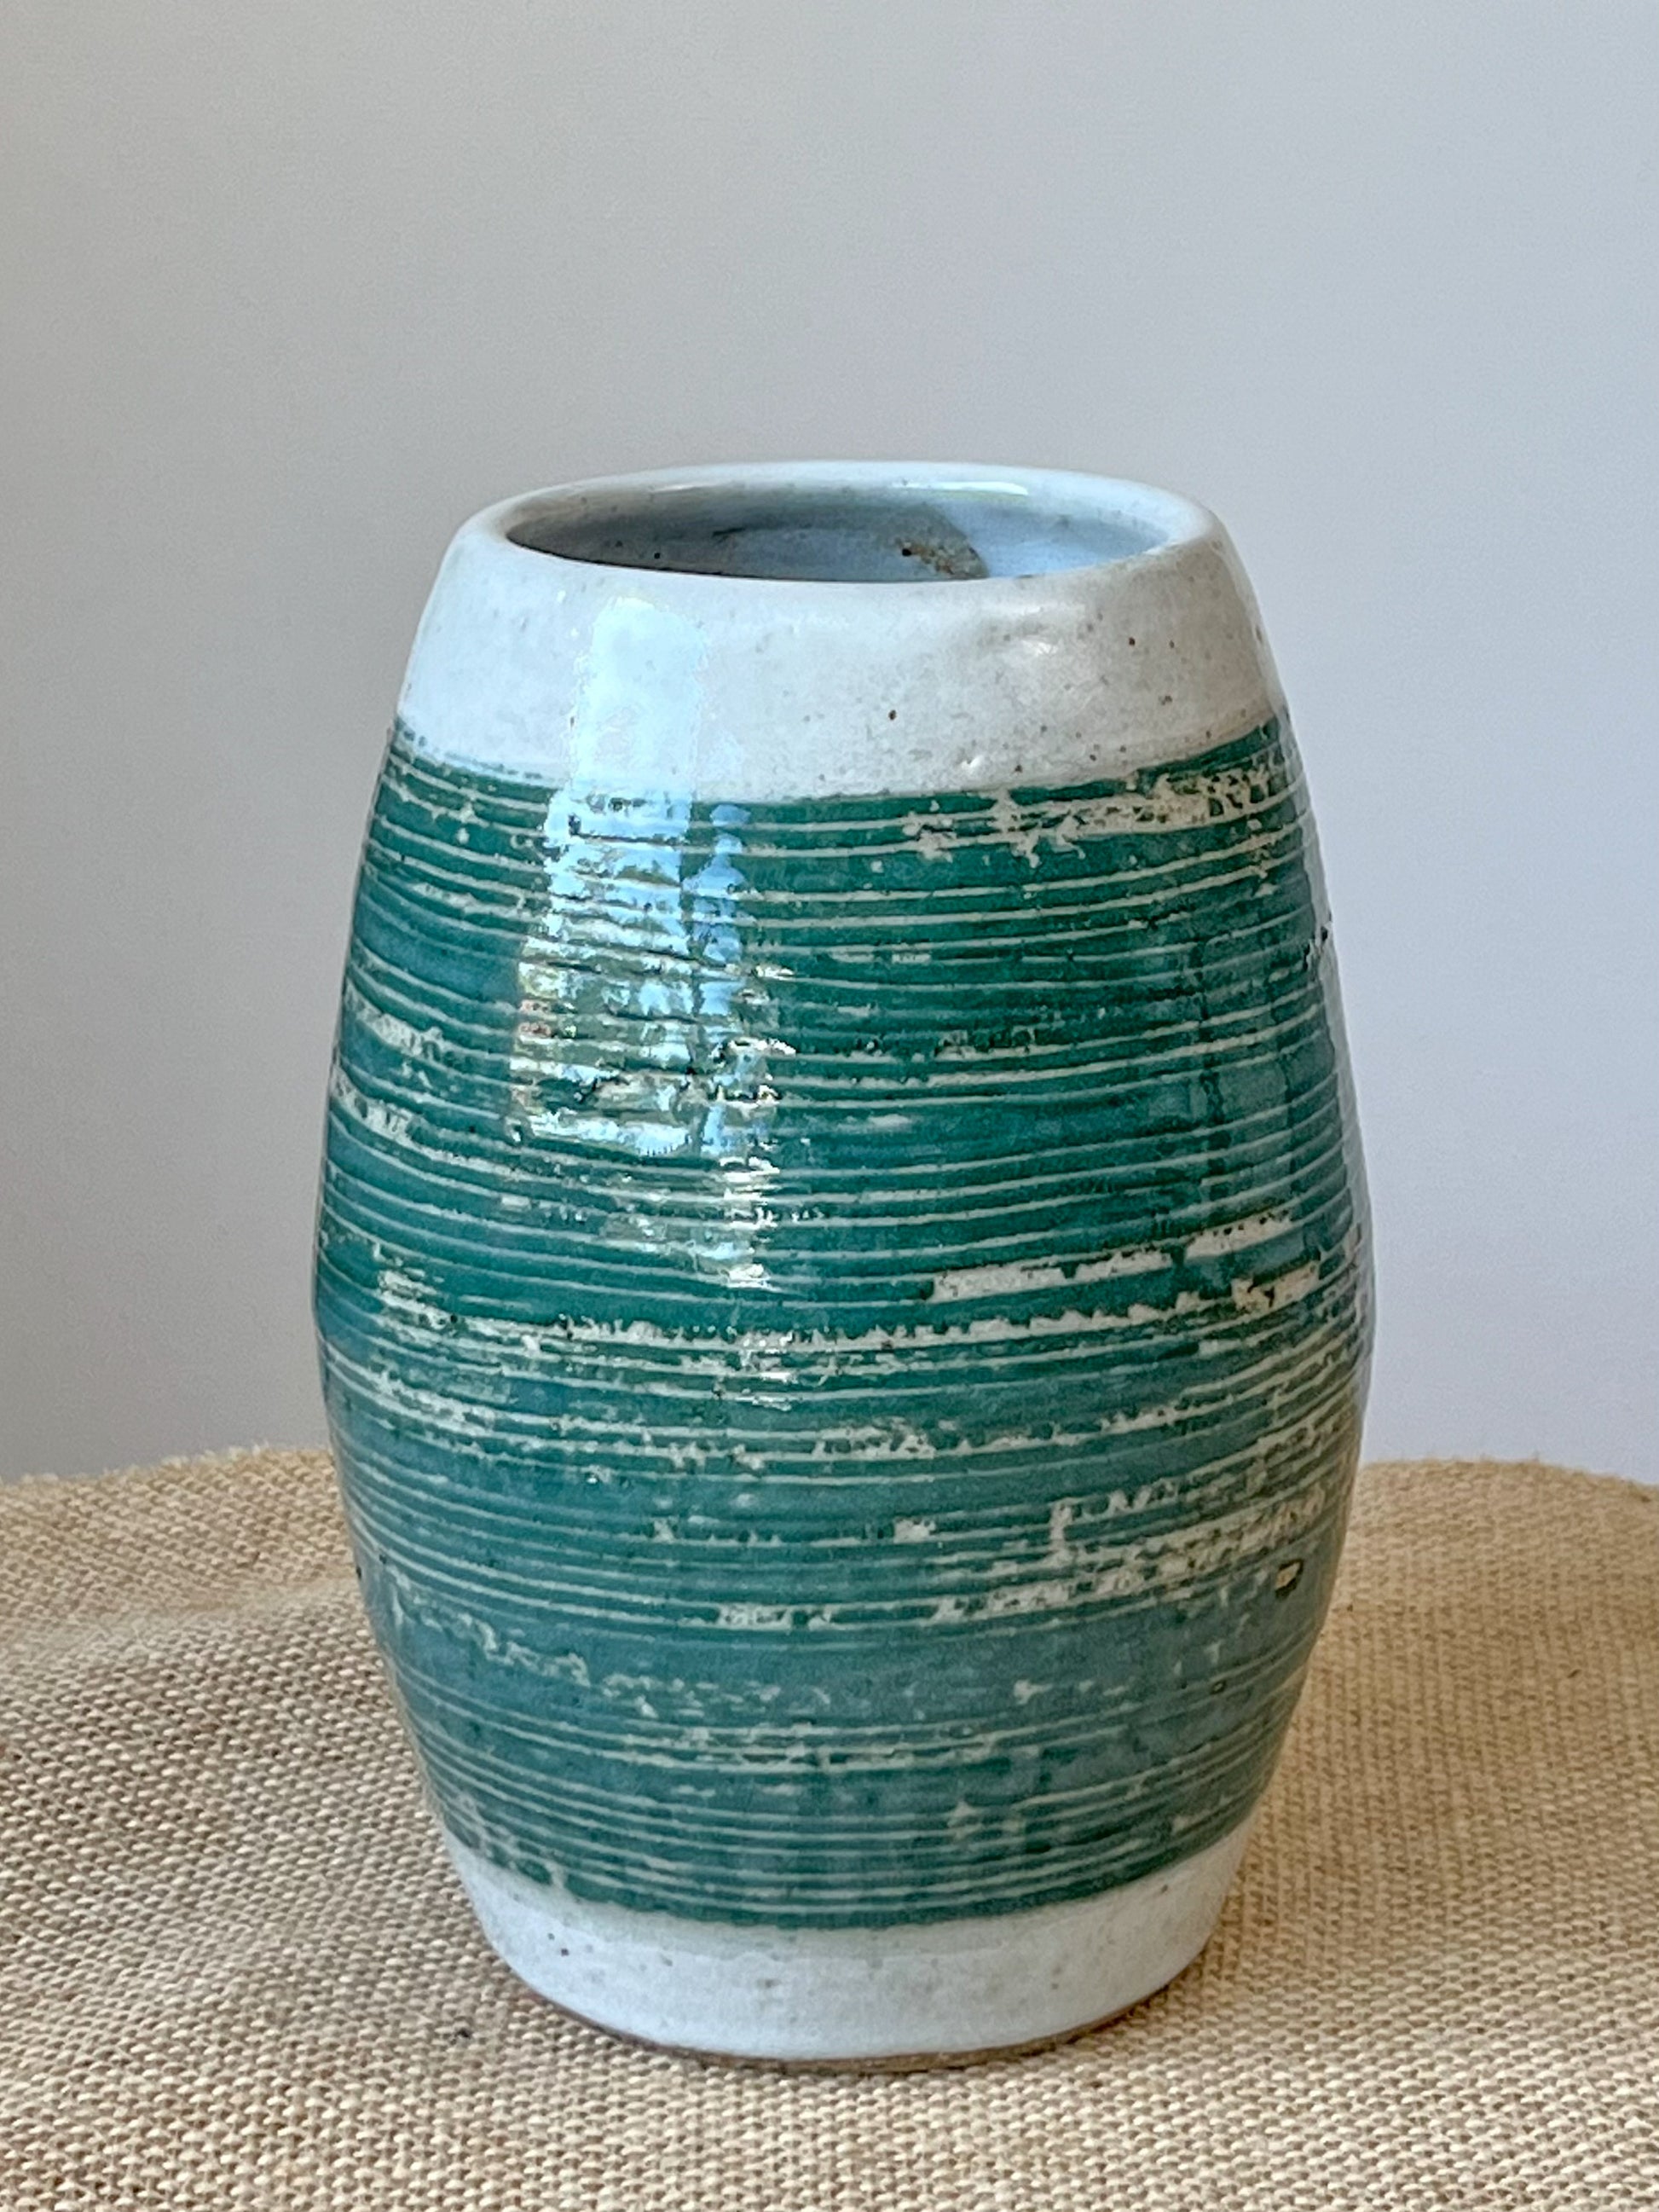 Wheel thrown vase using stoneware clay. The band of green glaze highlights the carved lines. A white glaze finishes the piece.